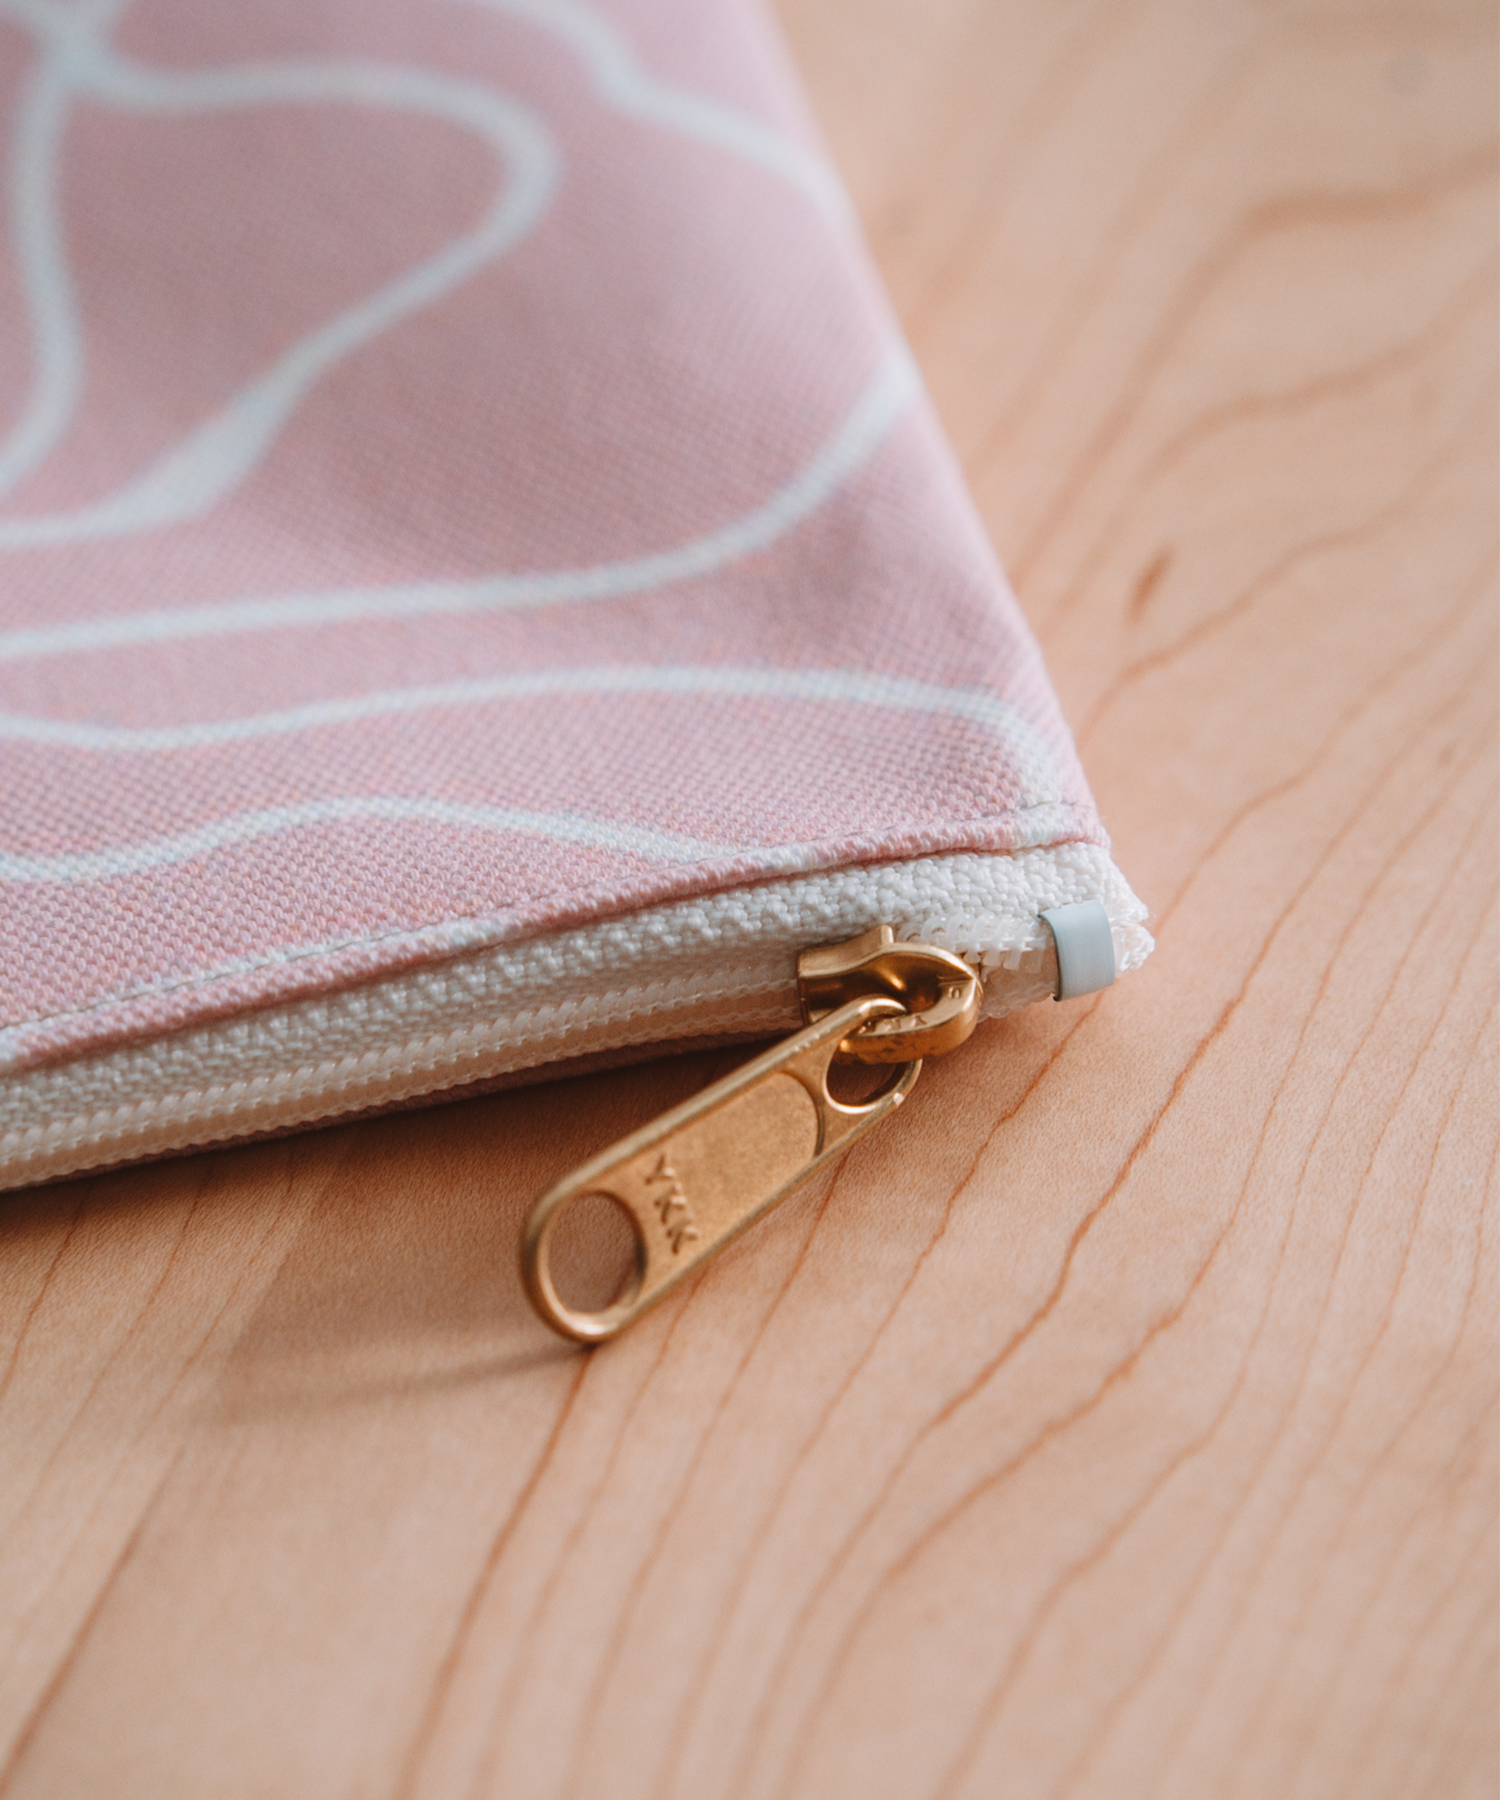 The YKK zipper on the accessory pouch